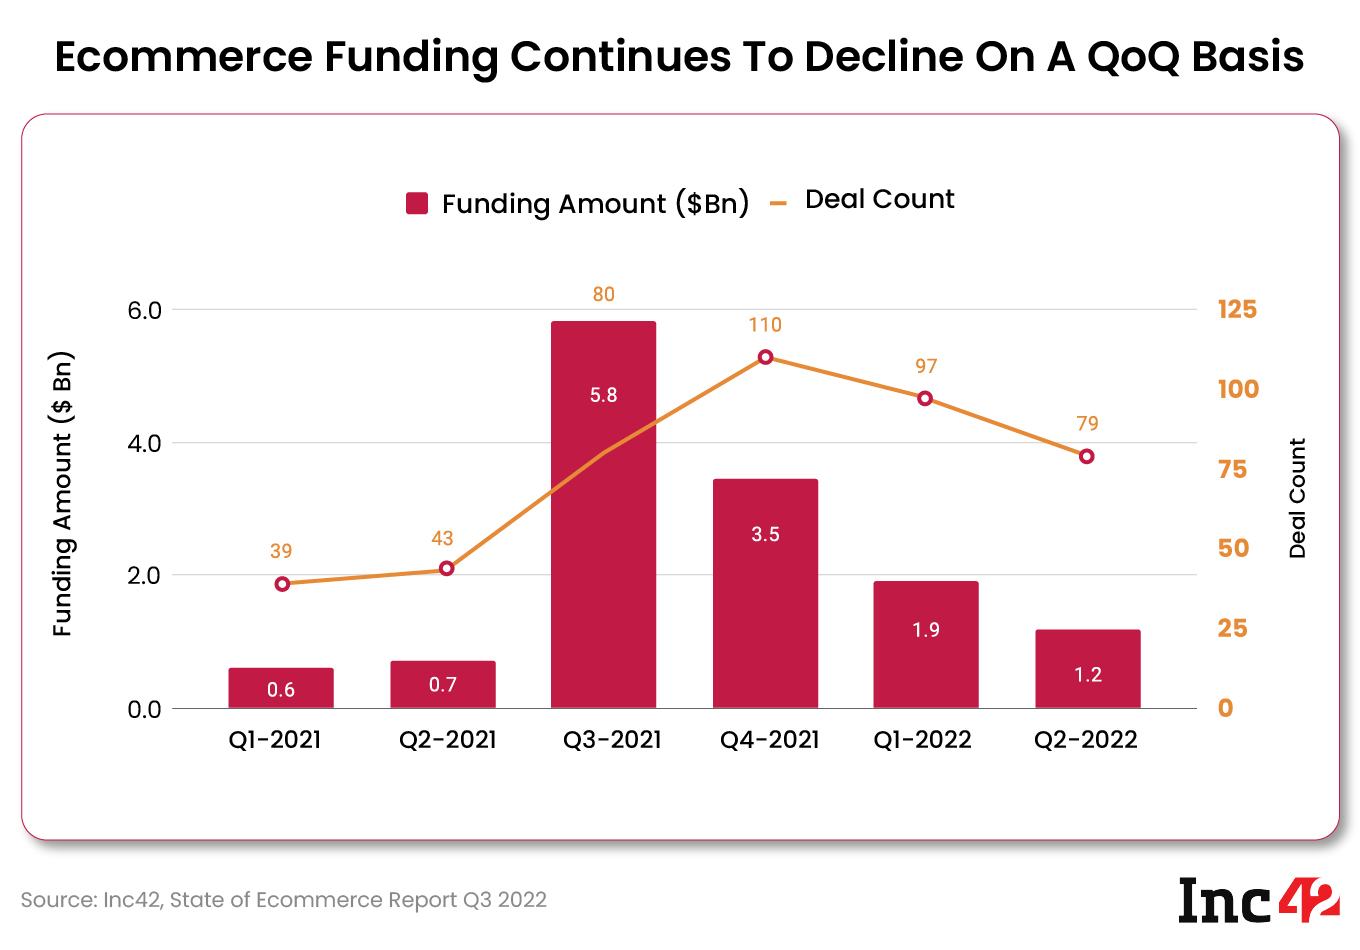 Ecommerce funding continues to decline on a QoQ basis